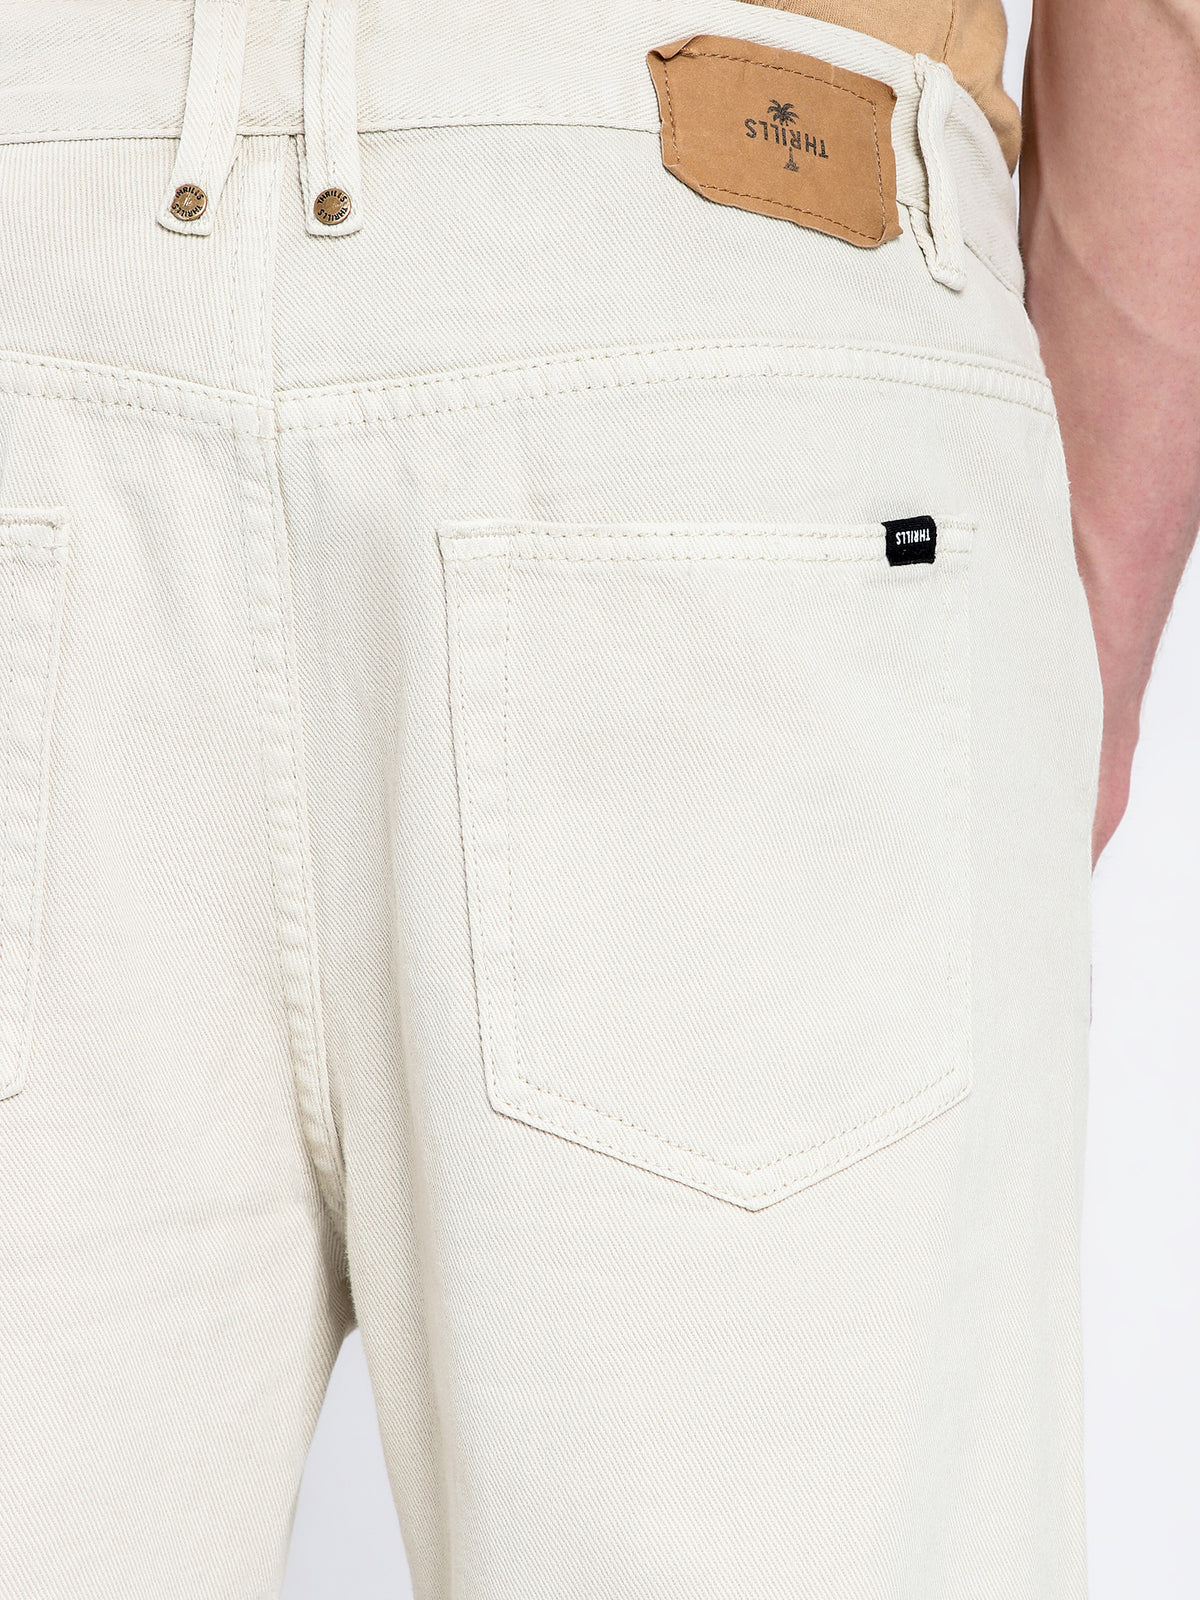 Drilled Chopped 5-Pocket Pants in Dirty White Denim